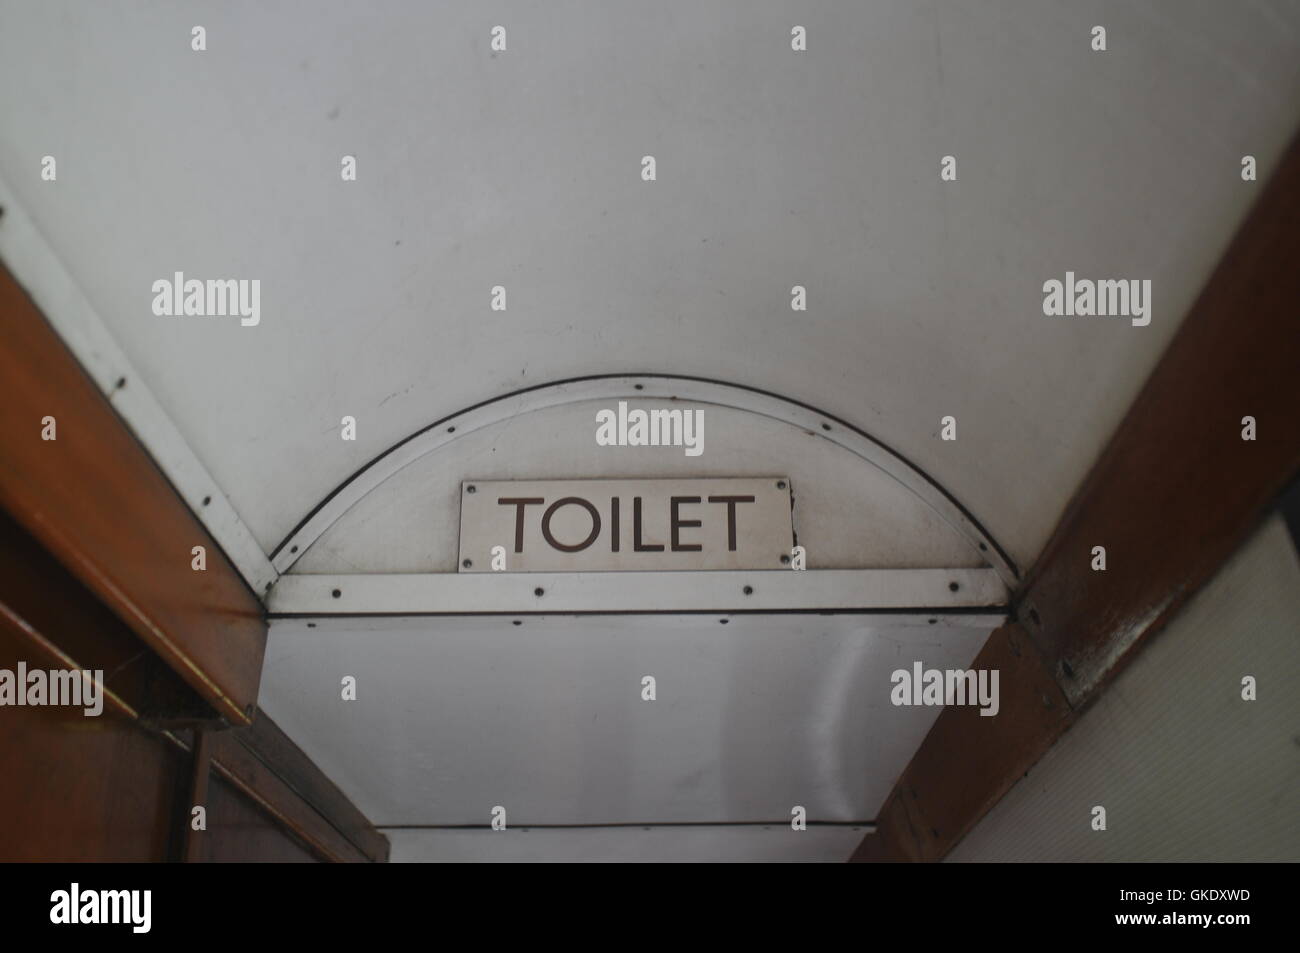 old toilet sign on a vintage railway carriage Stock Photo